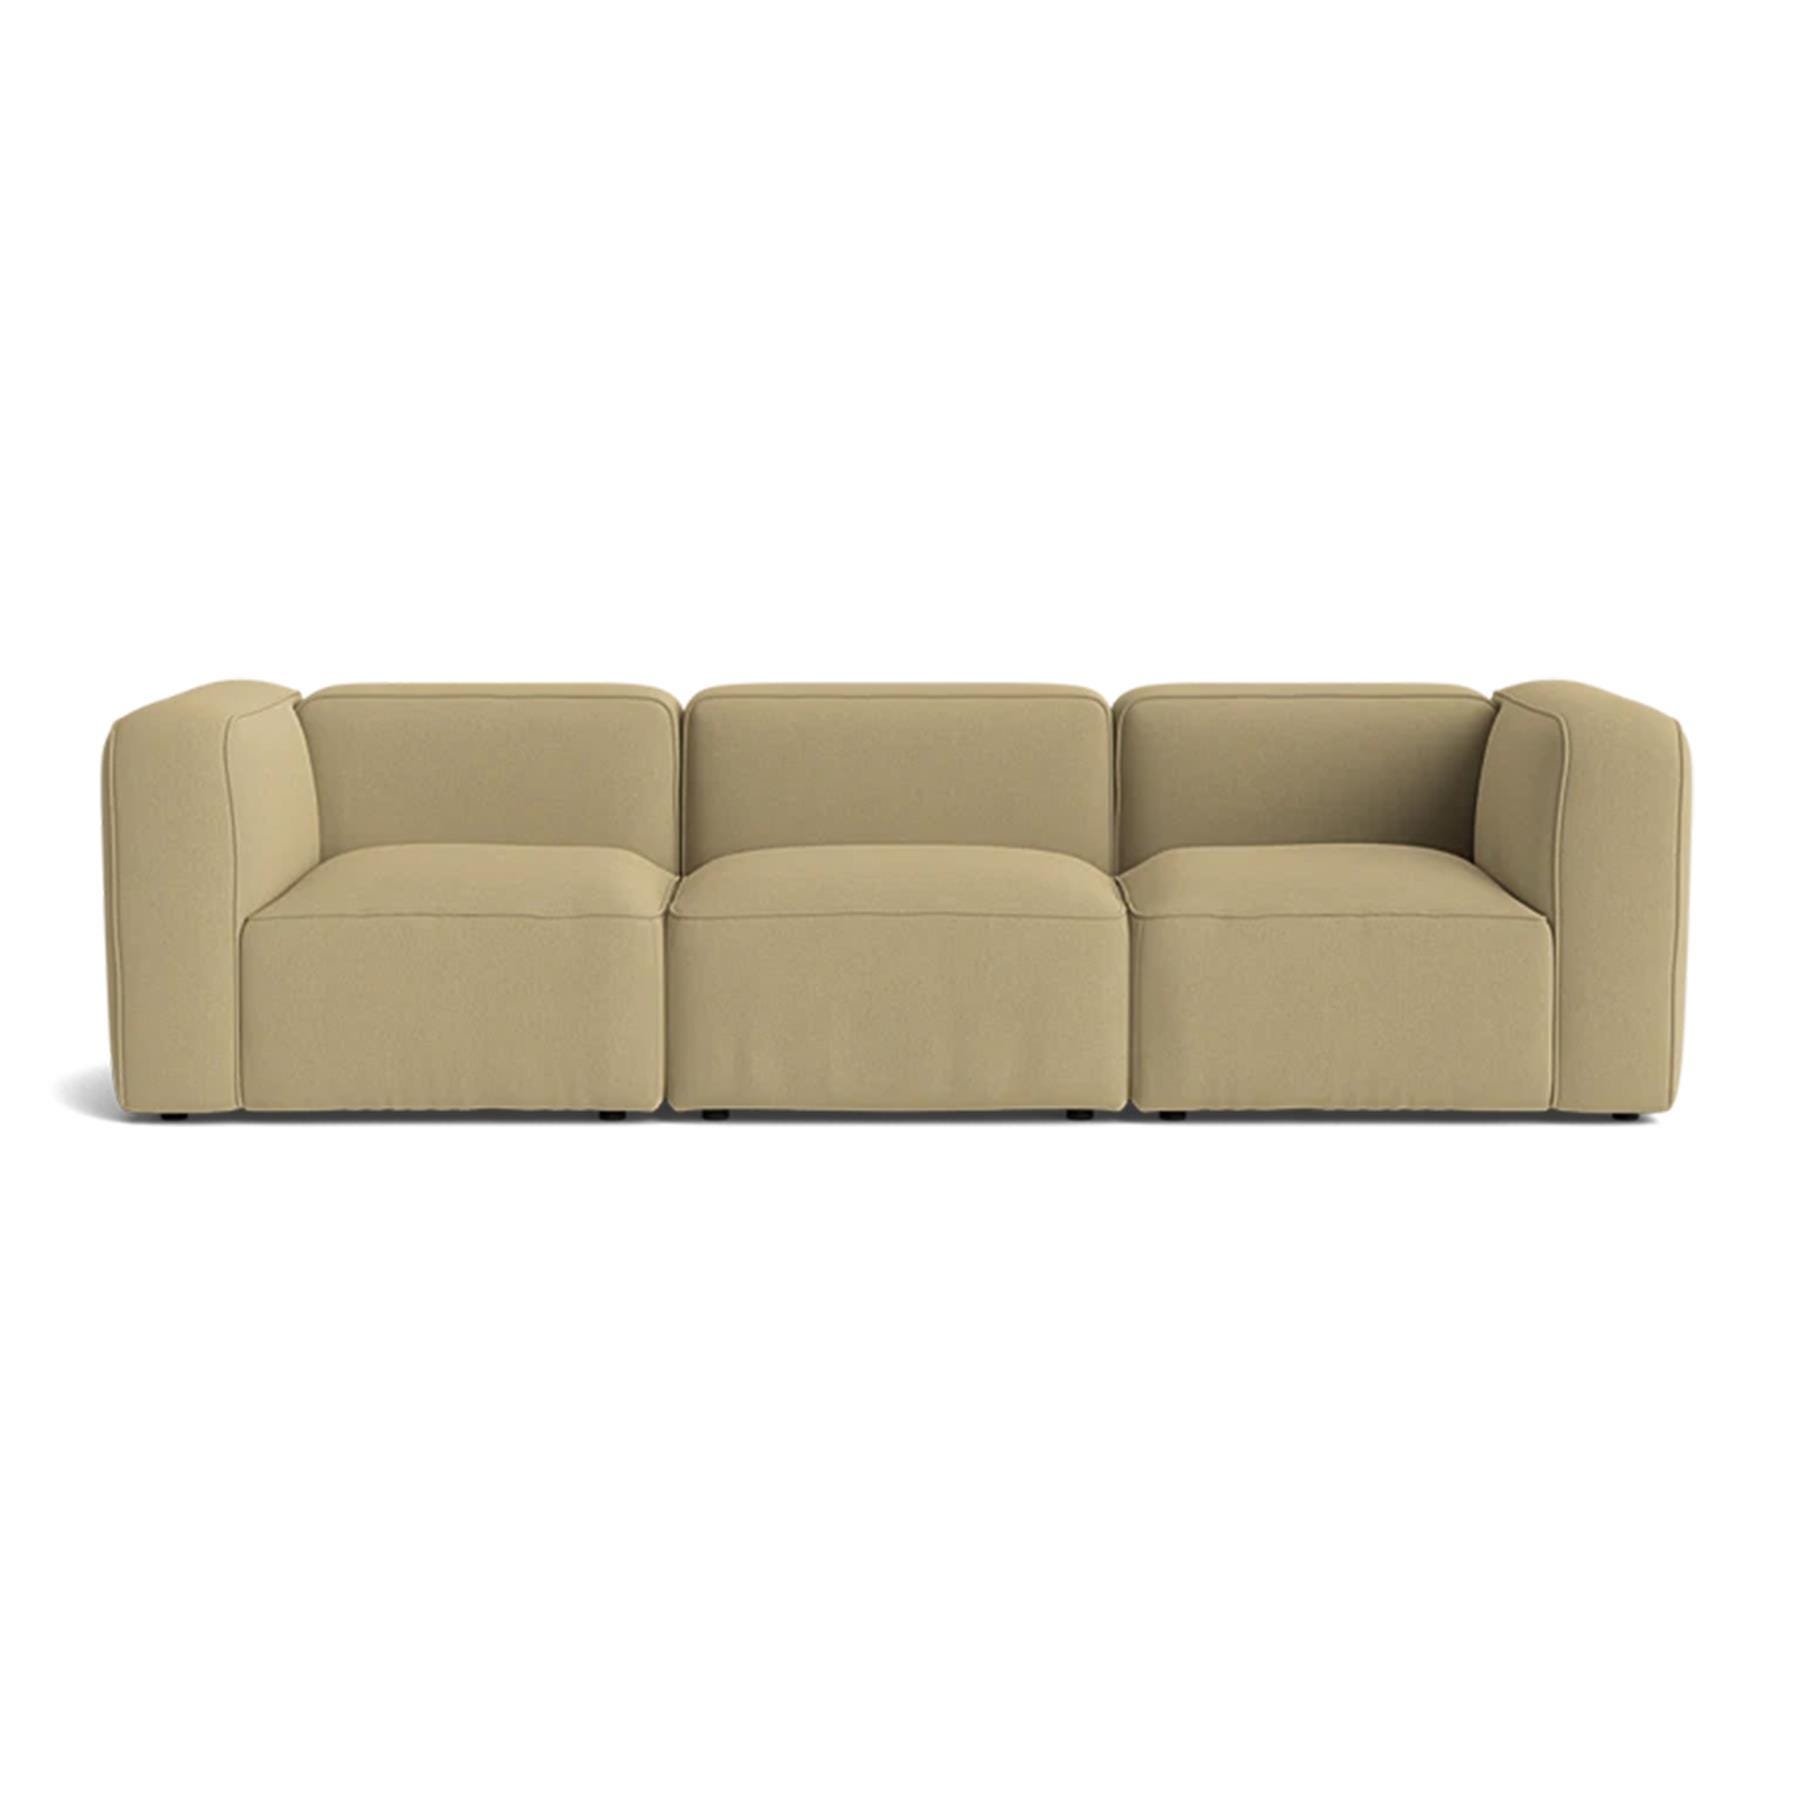 Make Nordic Basecamp 3 Seater Sofa Fiord 422 Yellow Designer Furniture From Holloways Of Ludlow